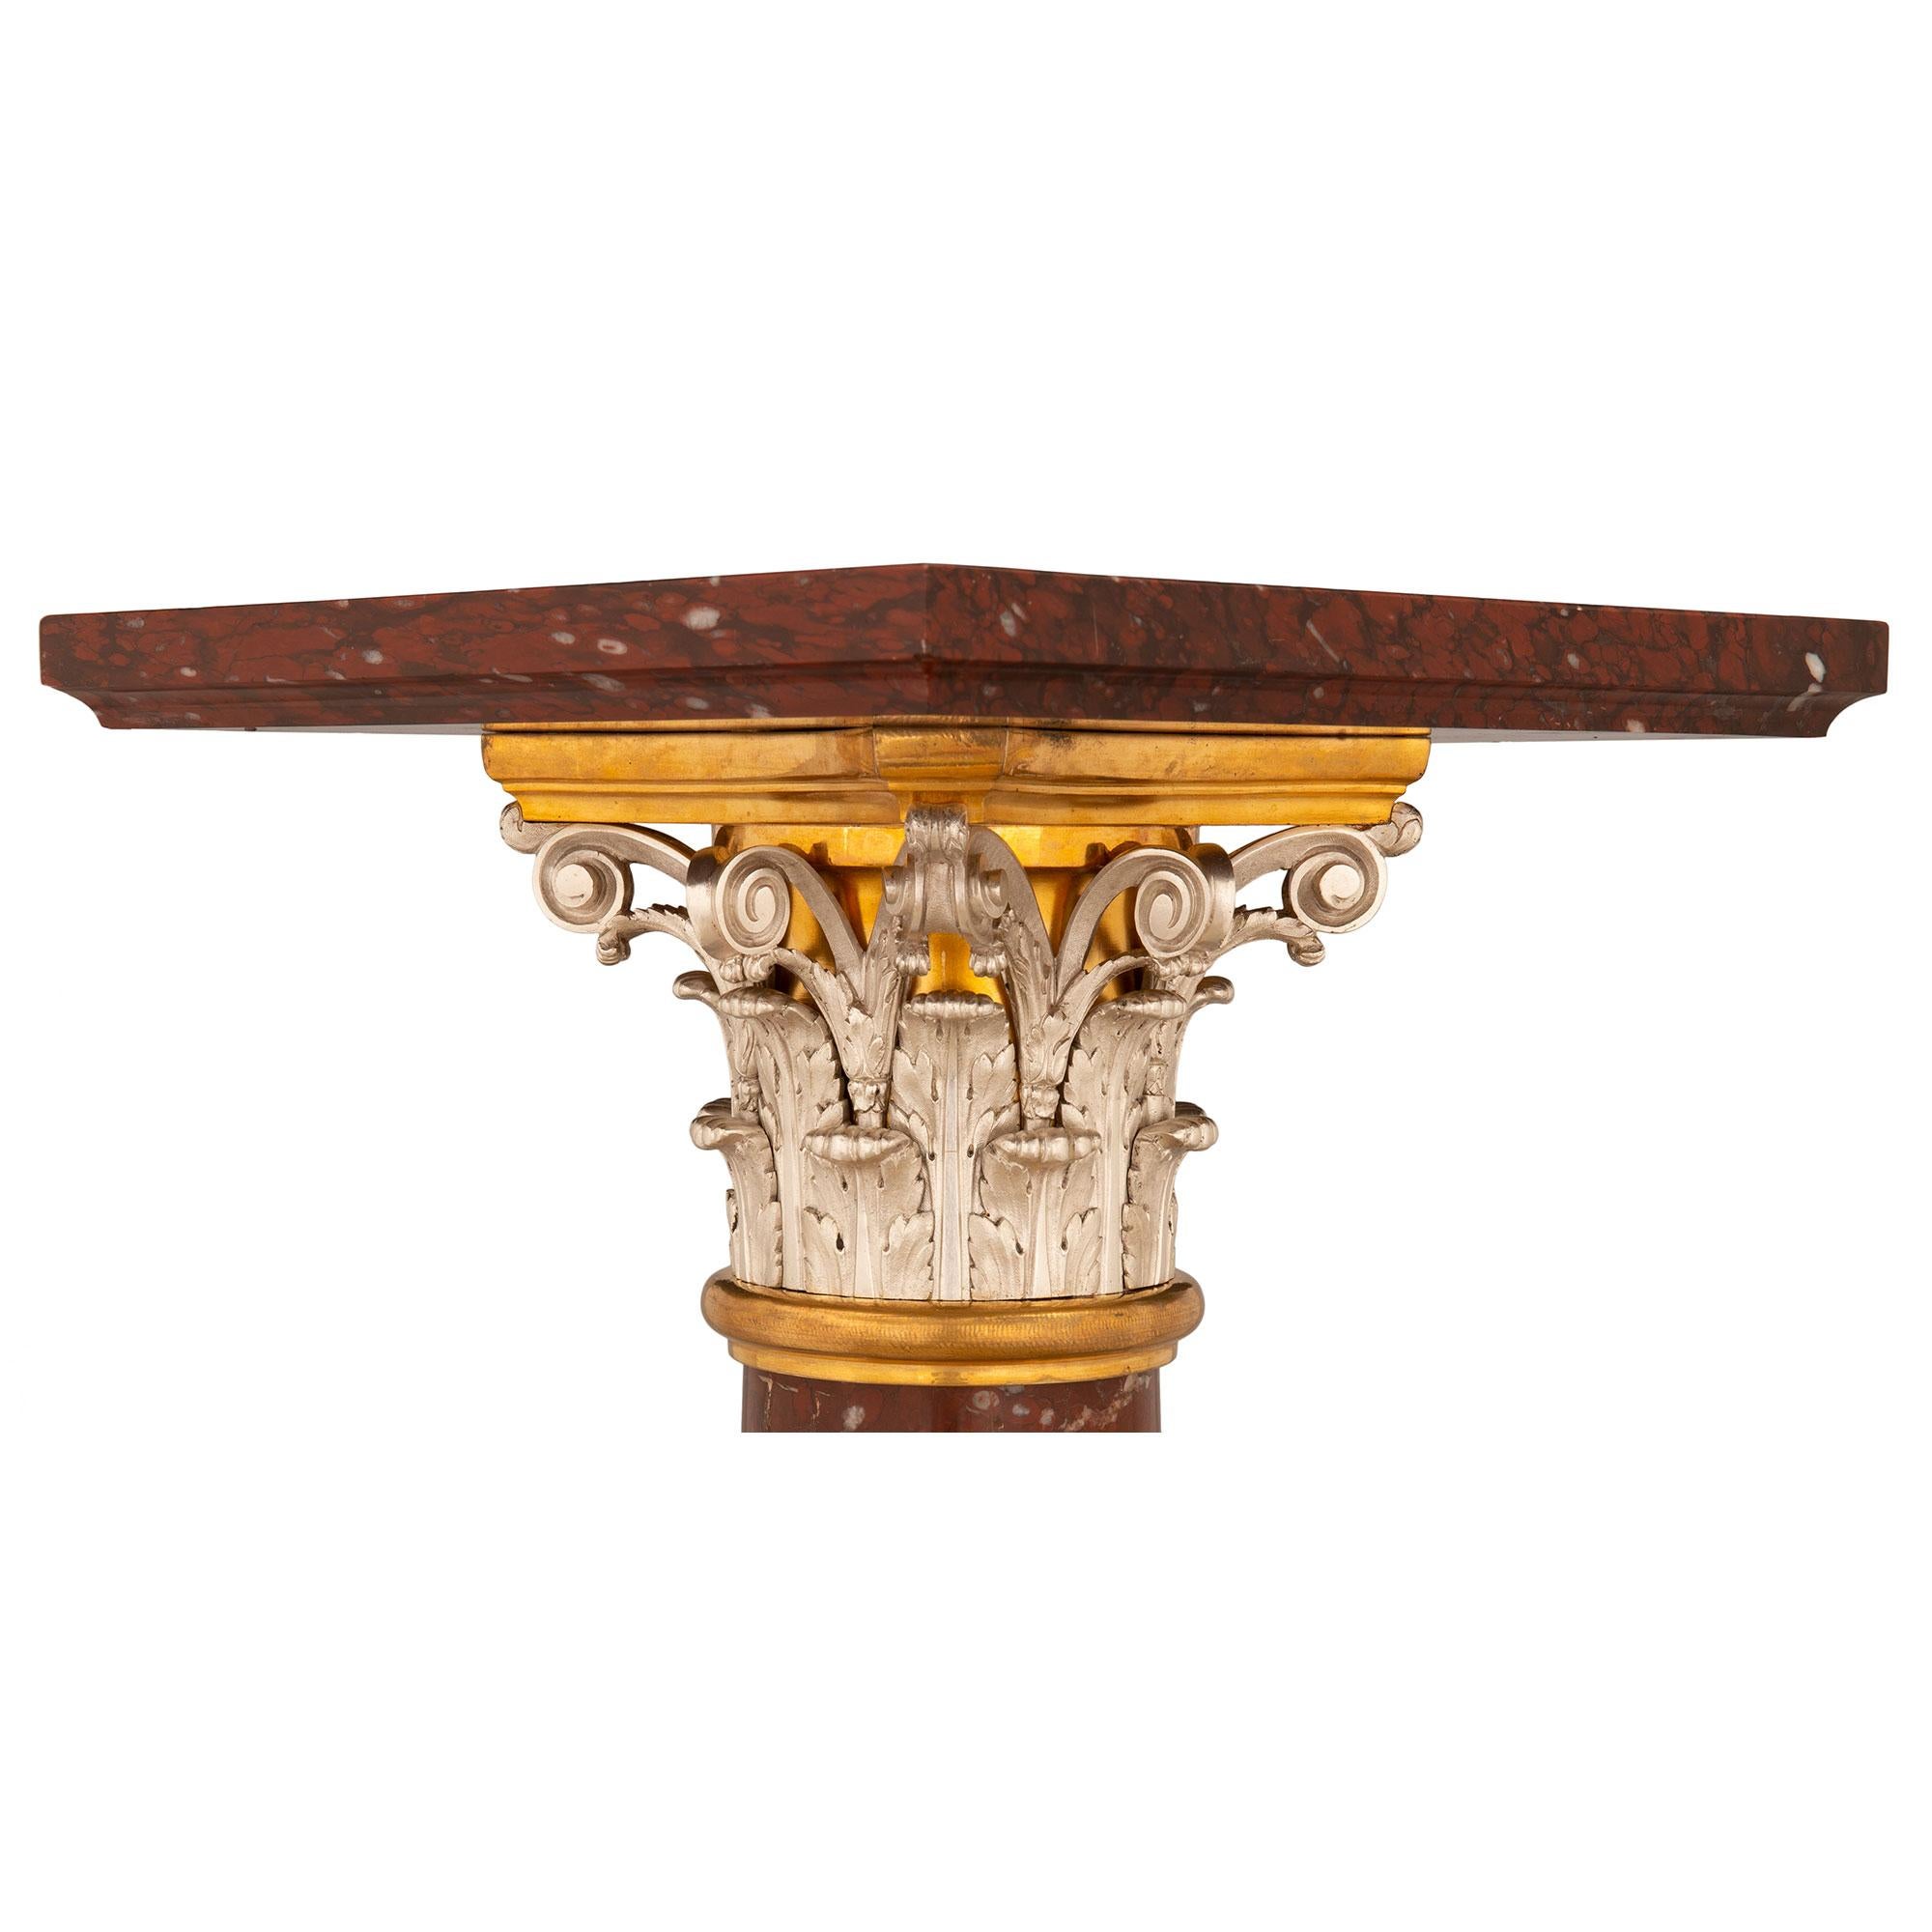 French 19th Century Louis XVI Style Griotte Marble, Ormolu and Bronze Pedestal In Good Condition For Sale In West Palm Beach, FL